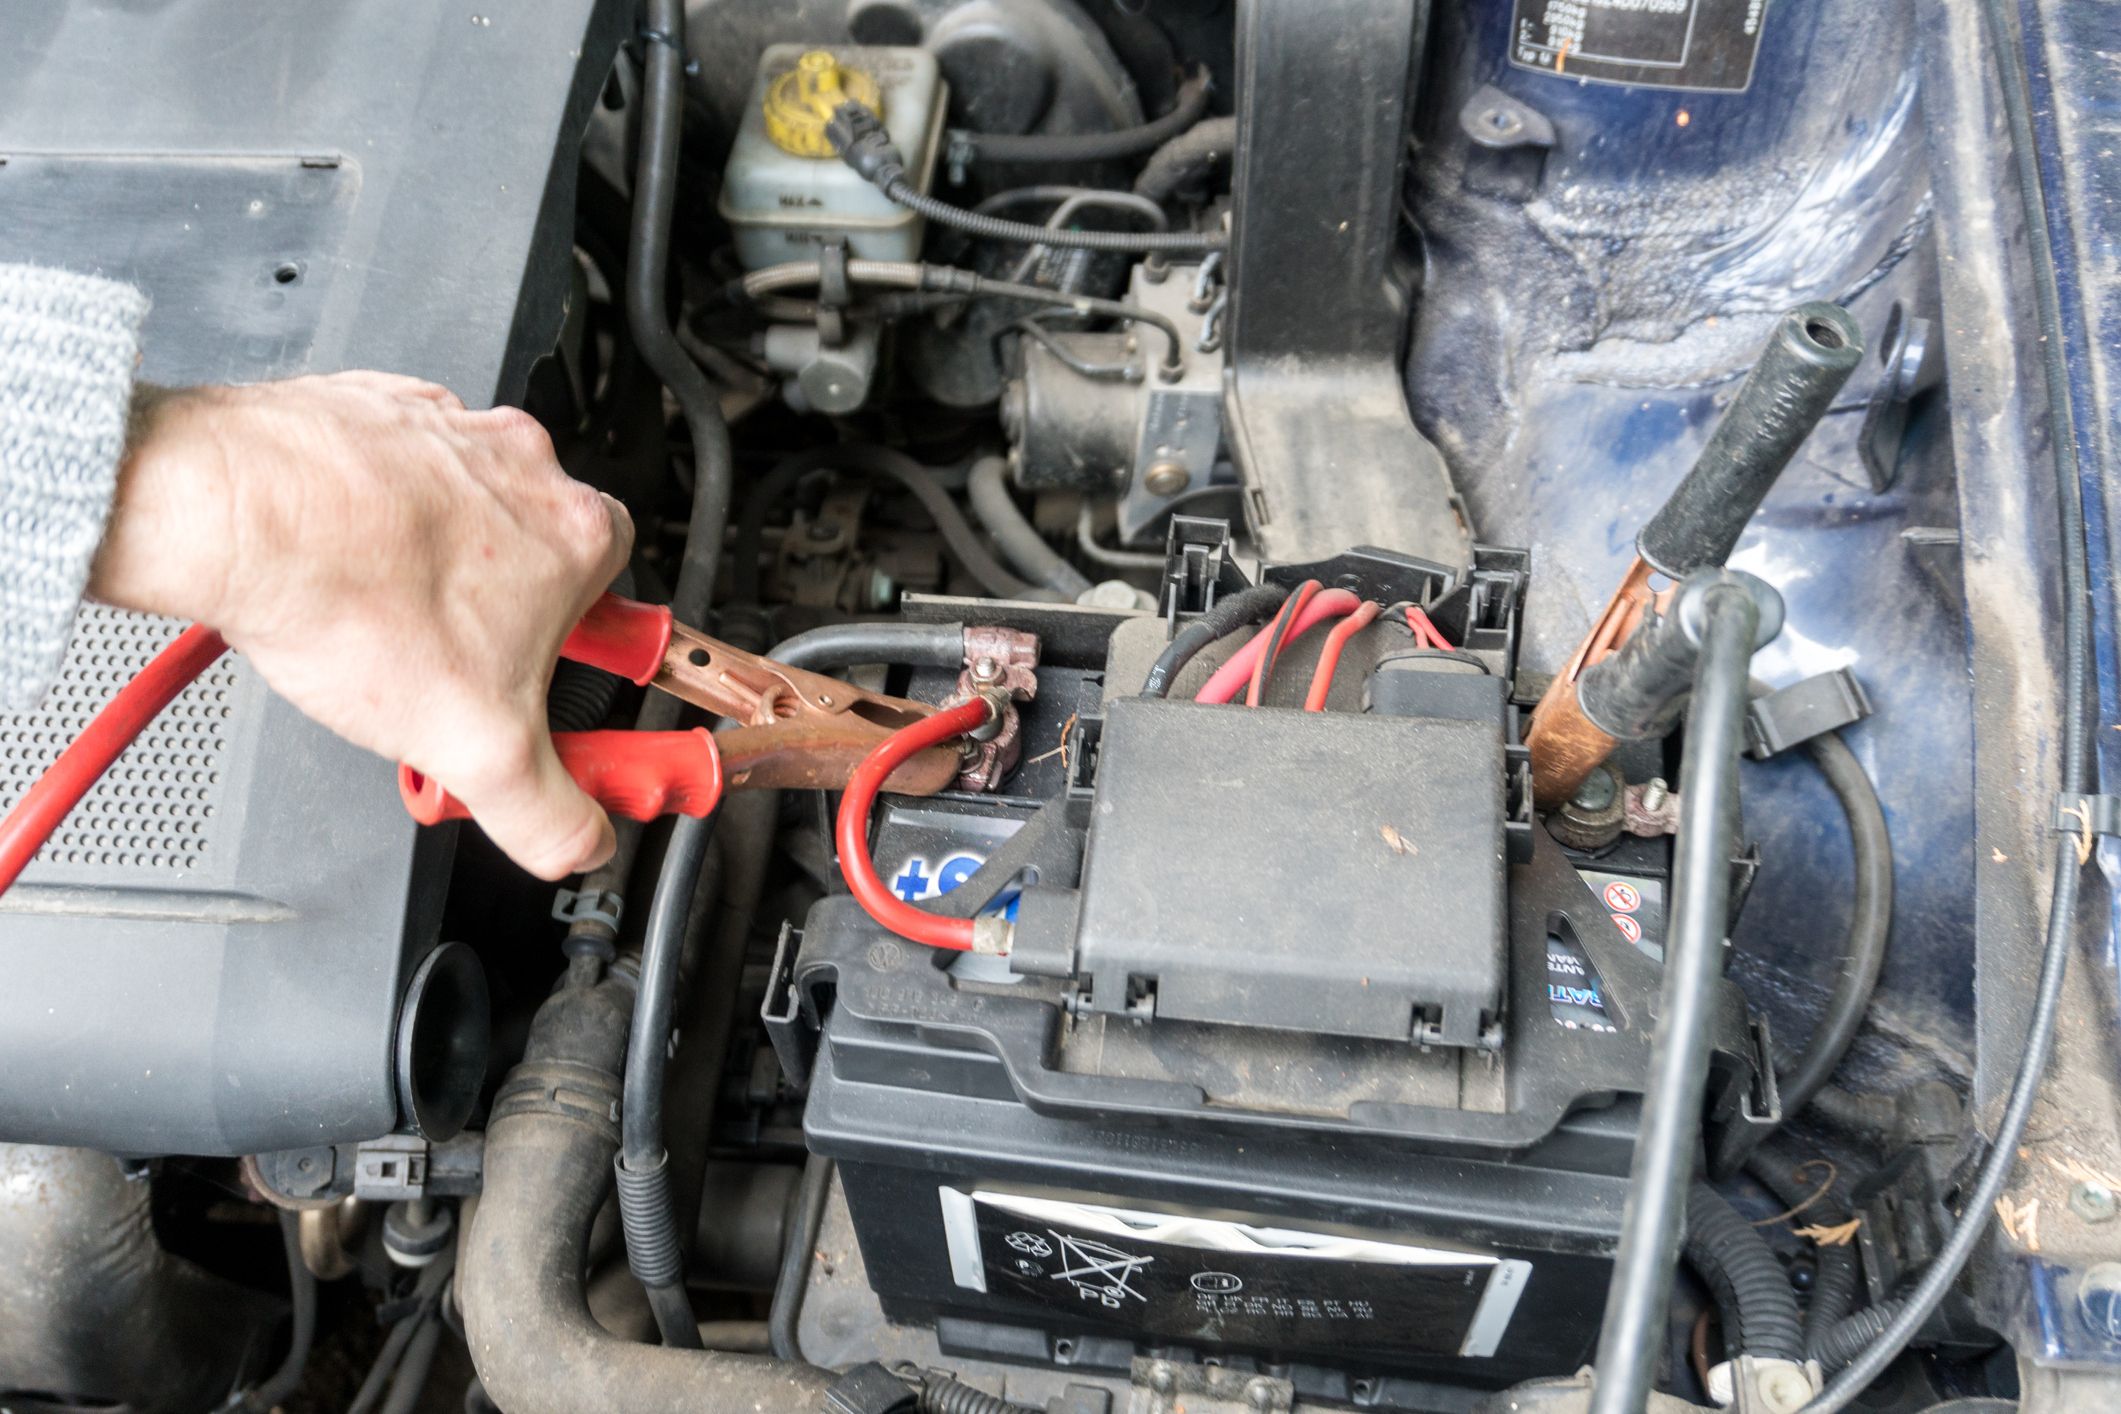 How to Jumpstart a Car Battery - How to Use Jumper Cables